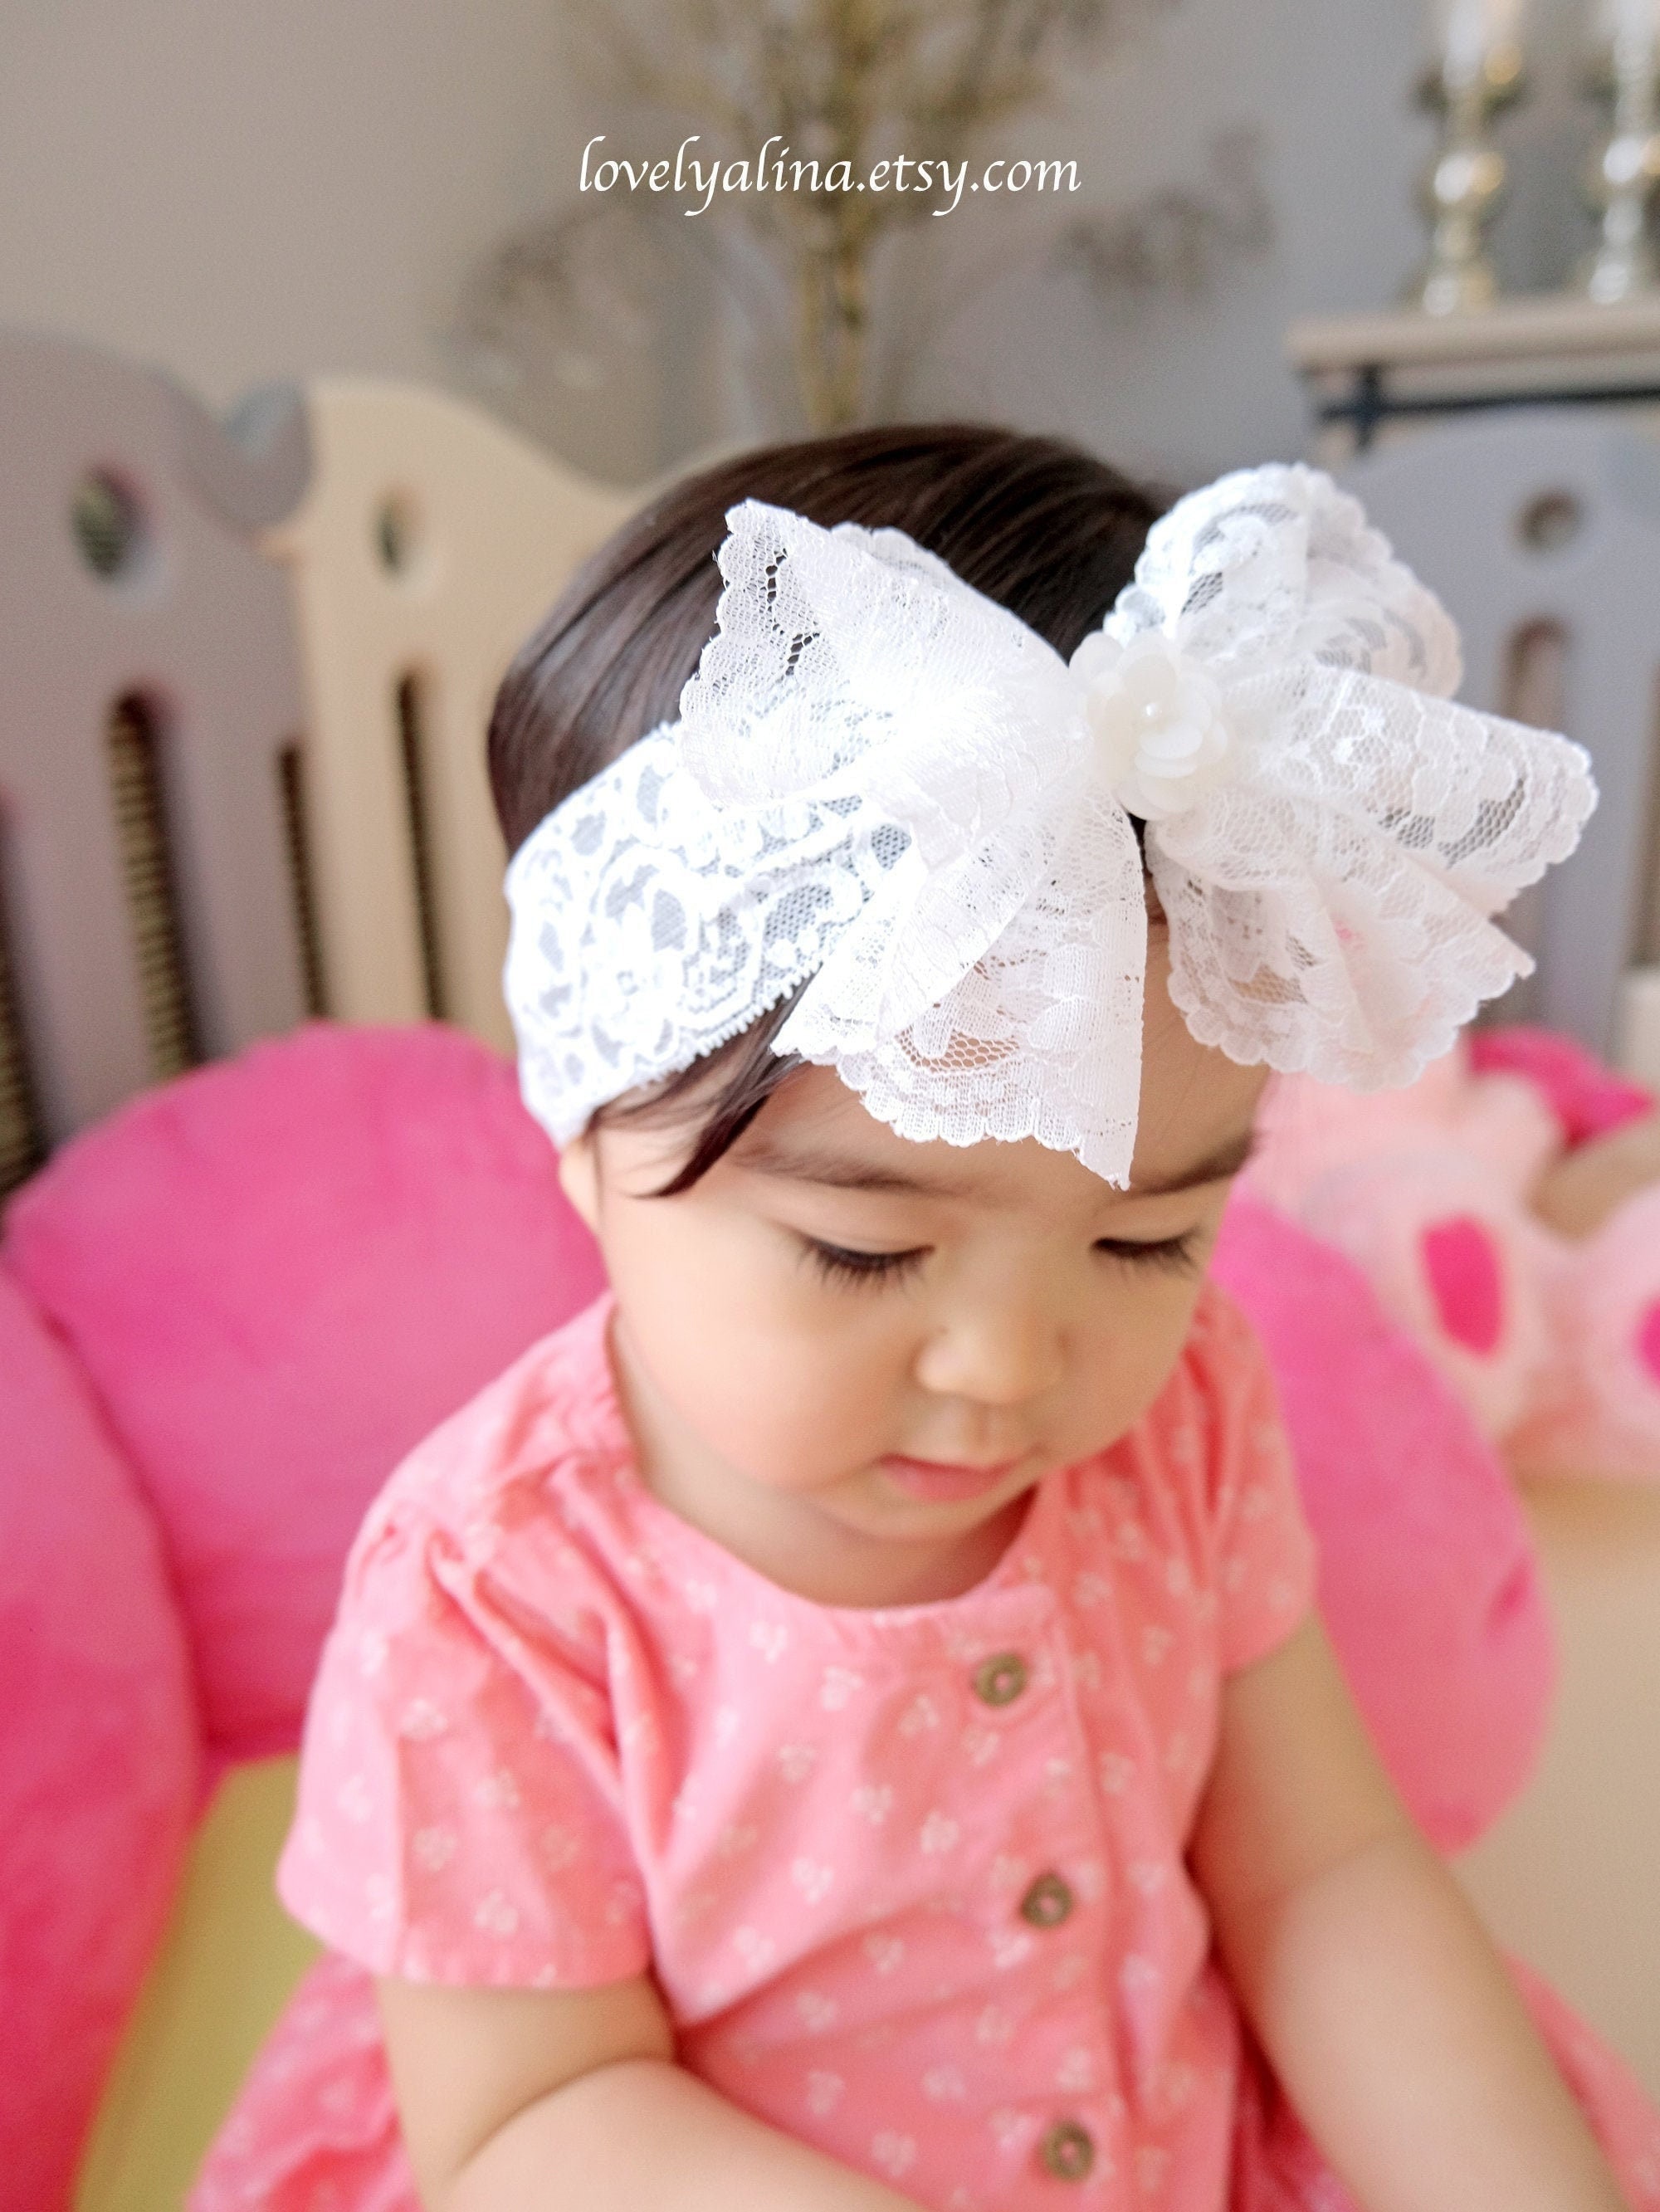 NOLITOY 15 Pcs Lace Forehead Band for Baby Kids Lace Headband Soft Lace  Band for Elastic Lace Forehead Band Girl Headbands Makeup Headband Tiara  for